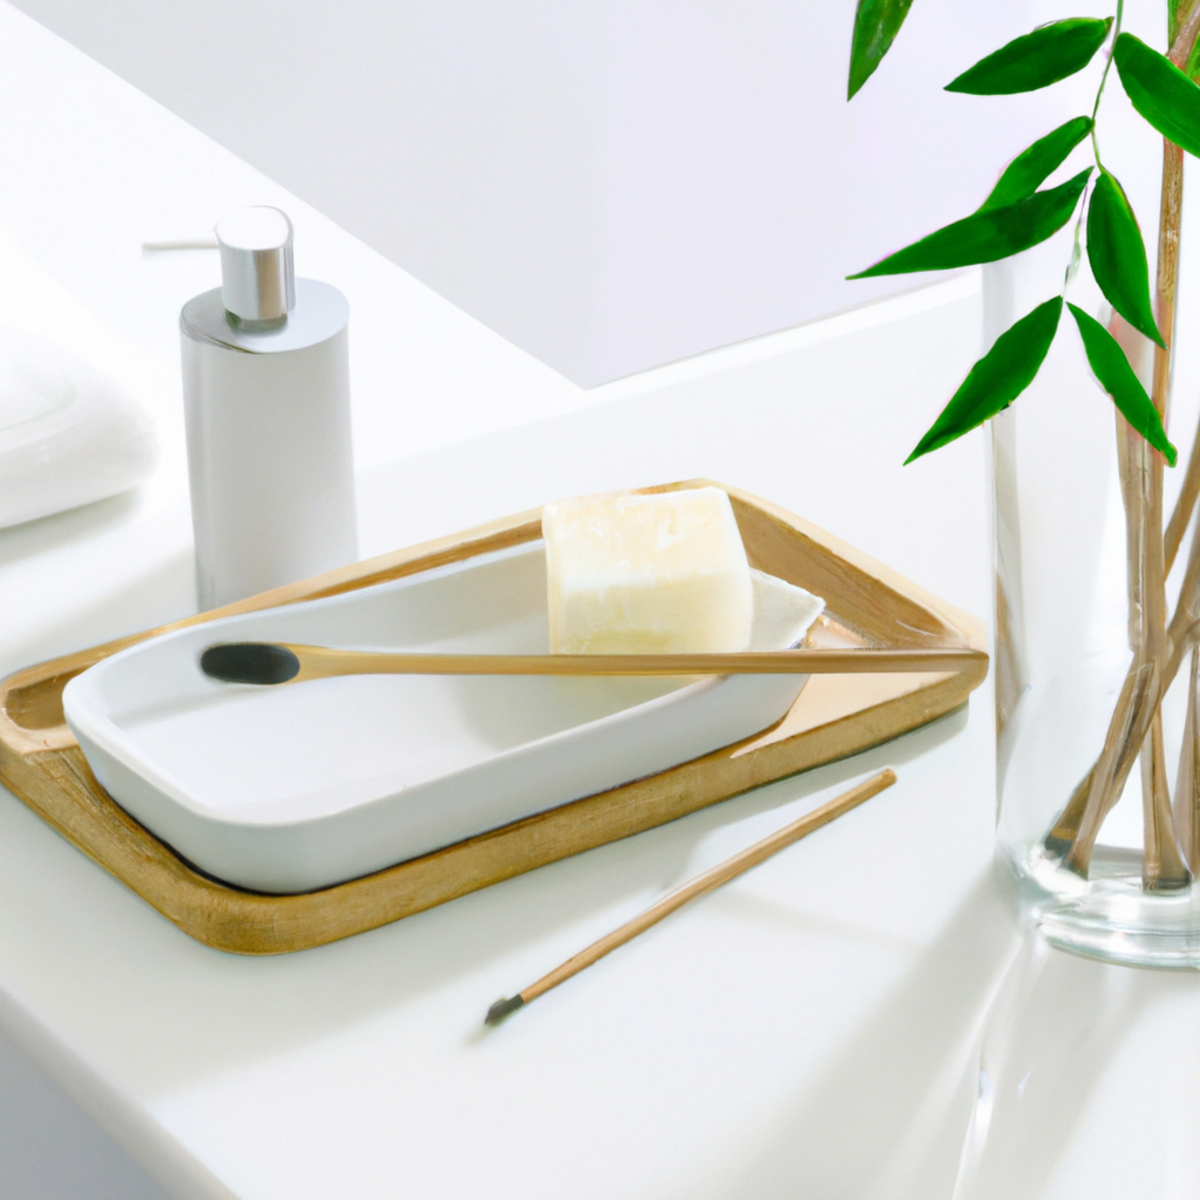 A serene bathroom countertop with sustainable beauty products, showcasing nature and modern aesthetics.